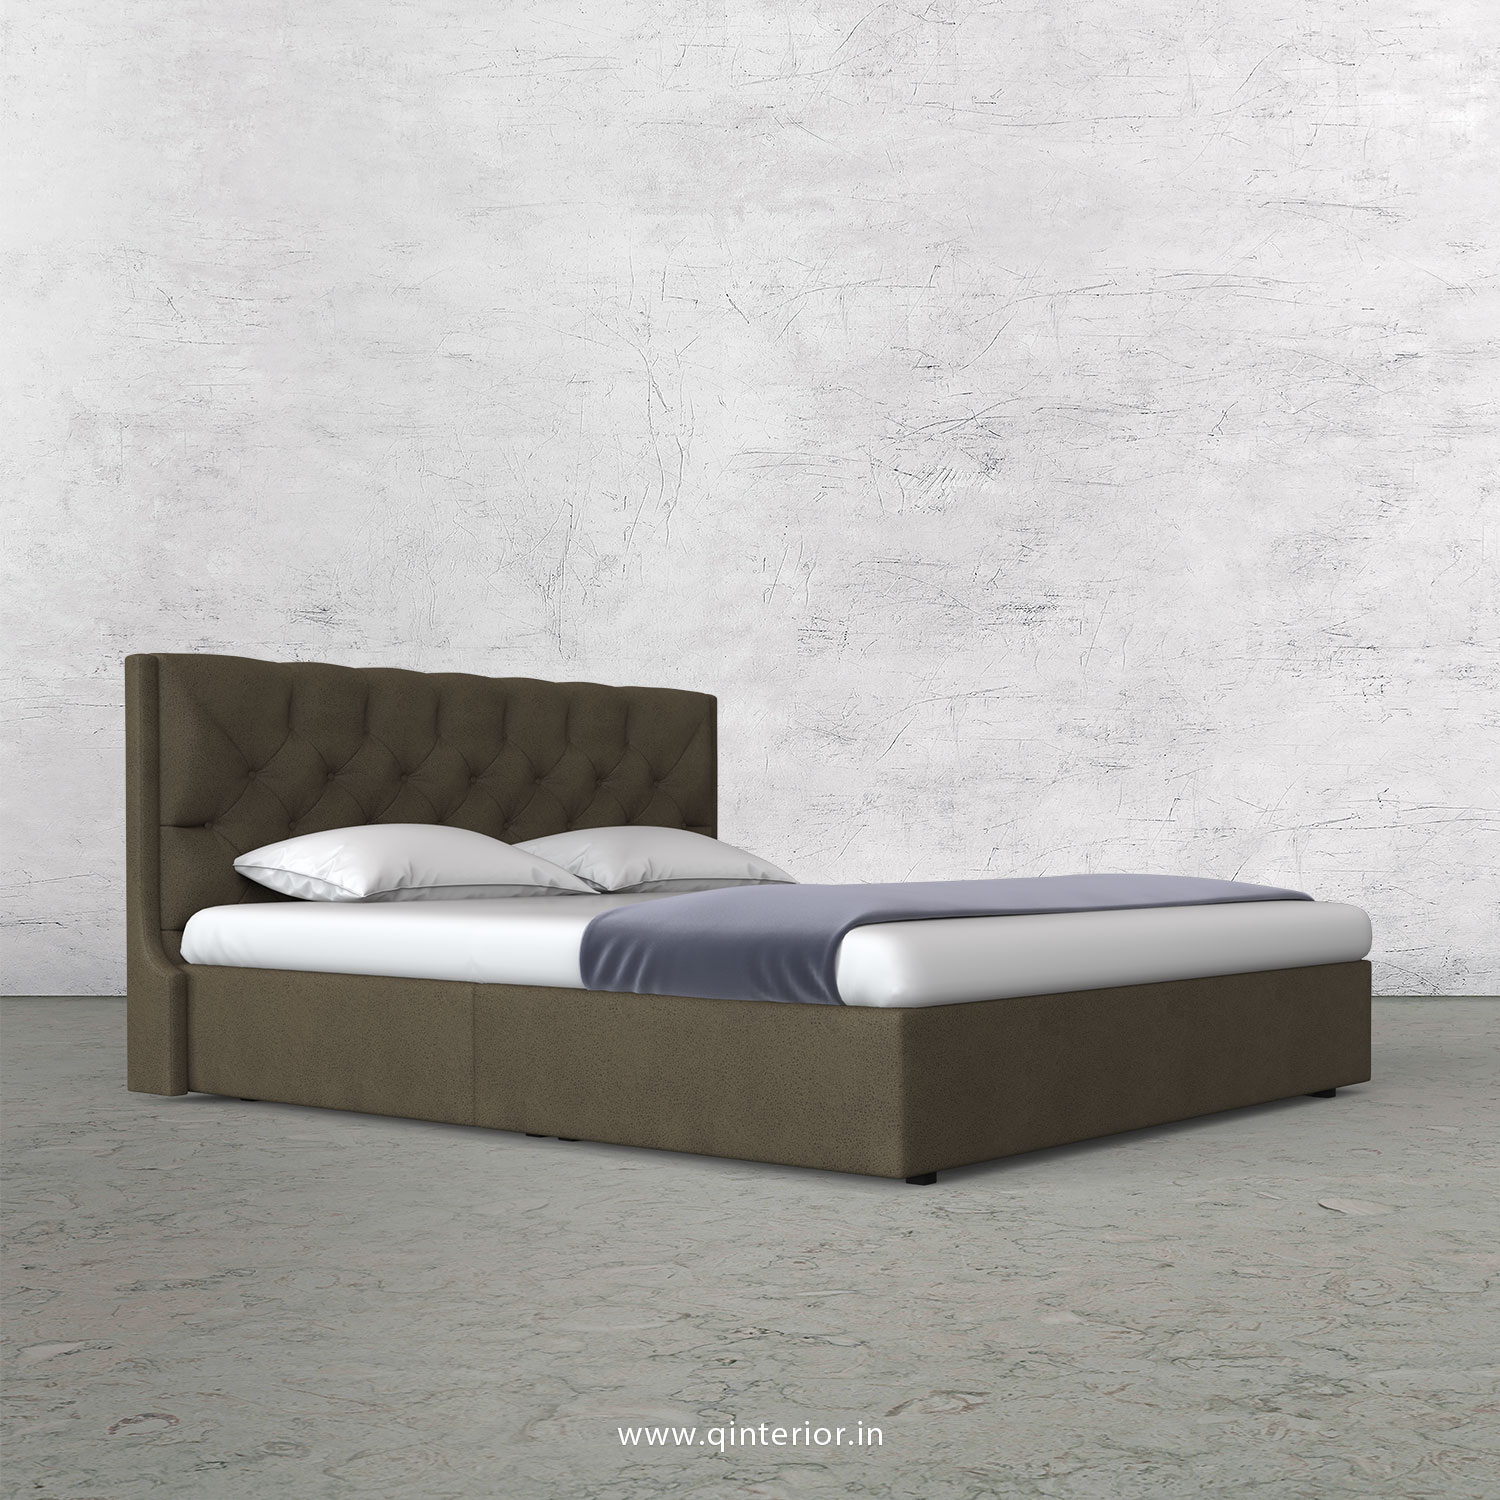 Scorpius Queen Bed in Fab Leather Fabric - QBD009 FL06